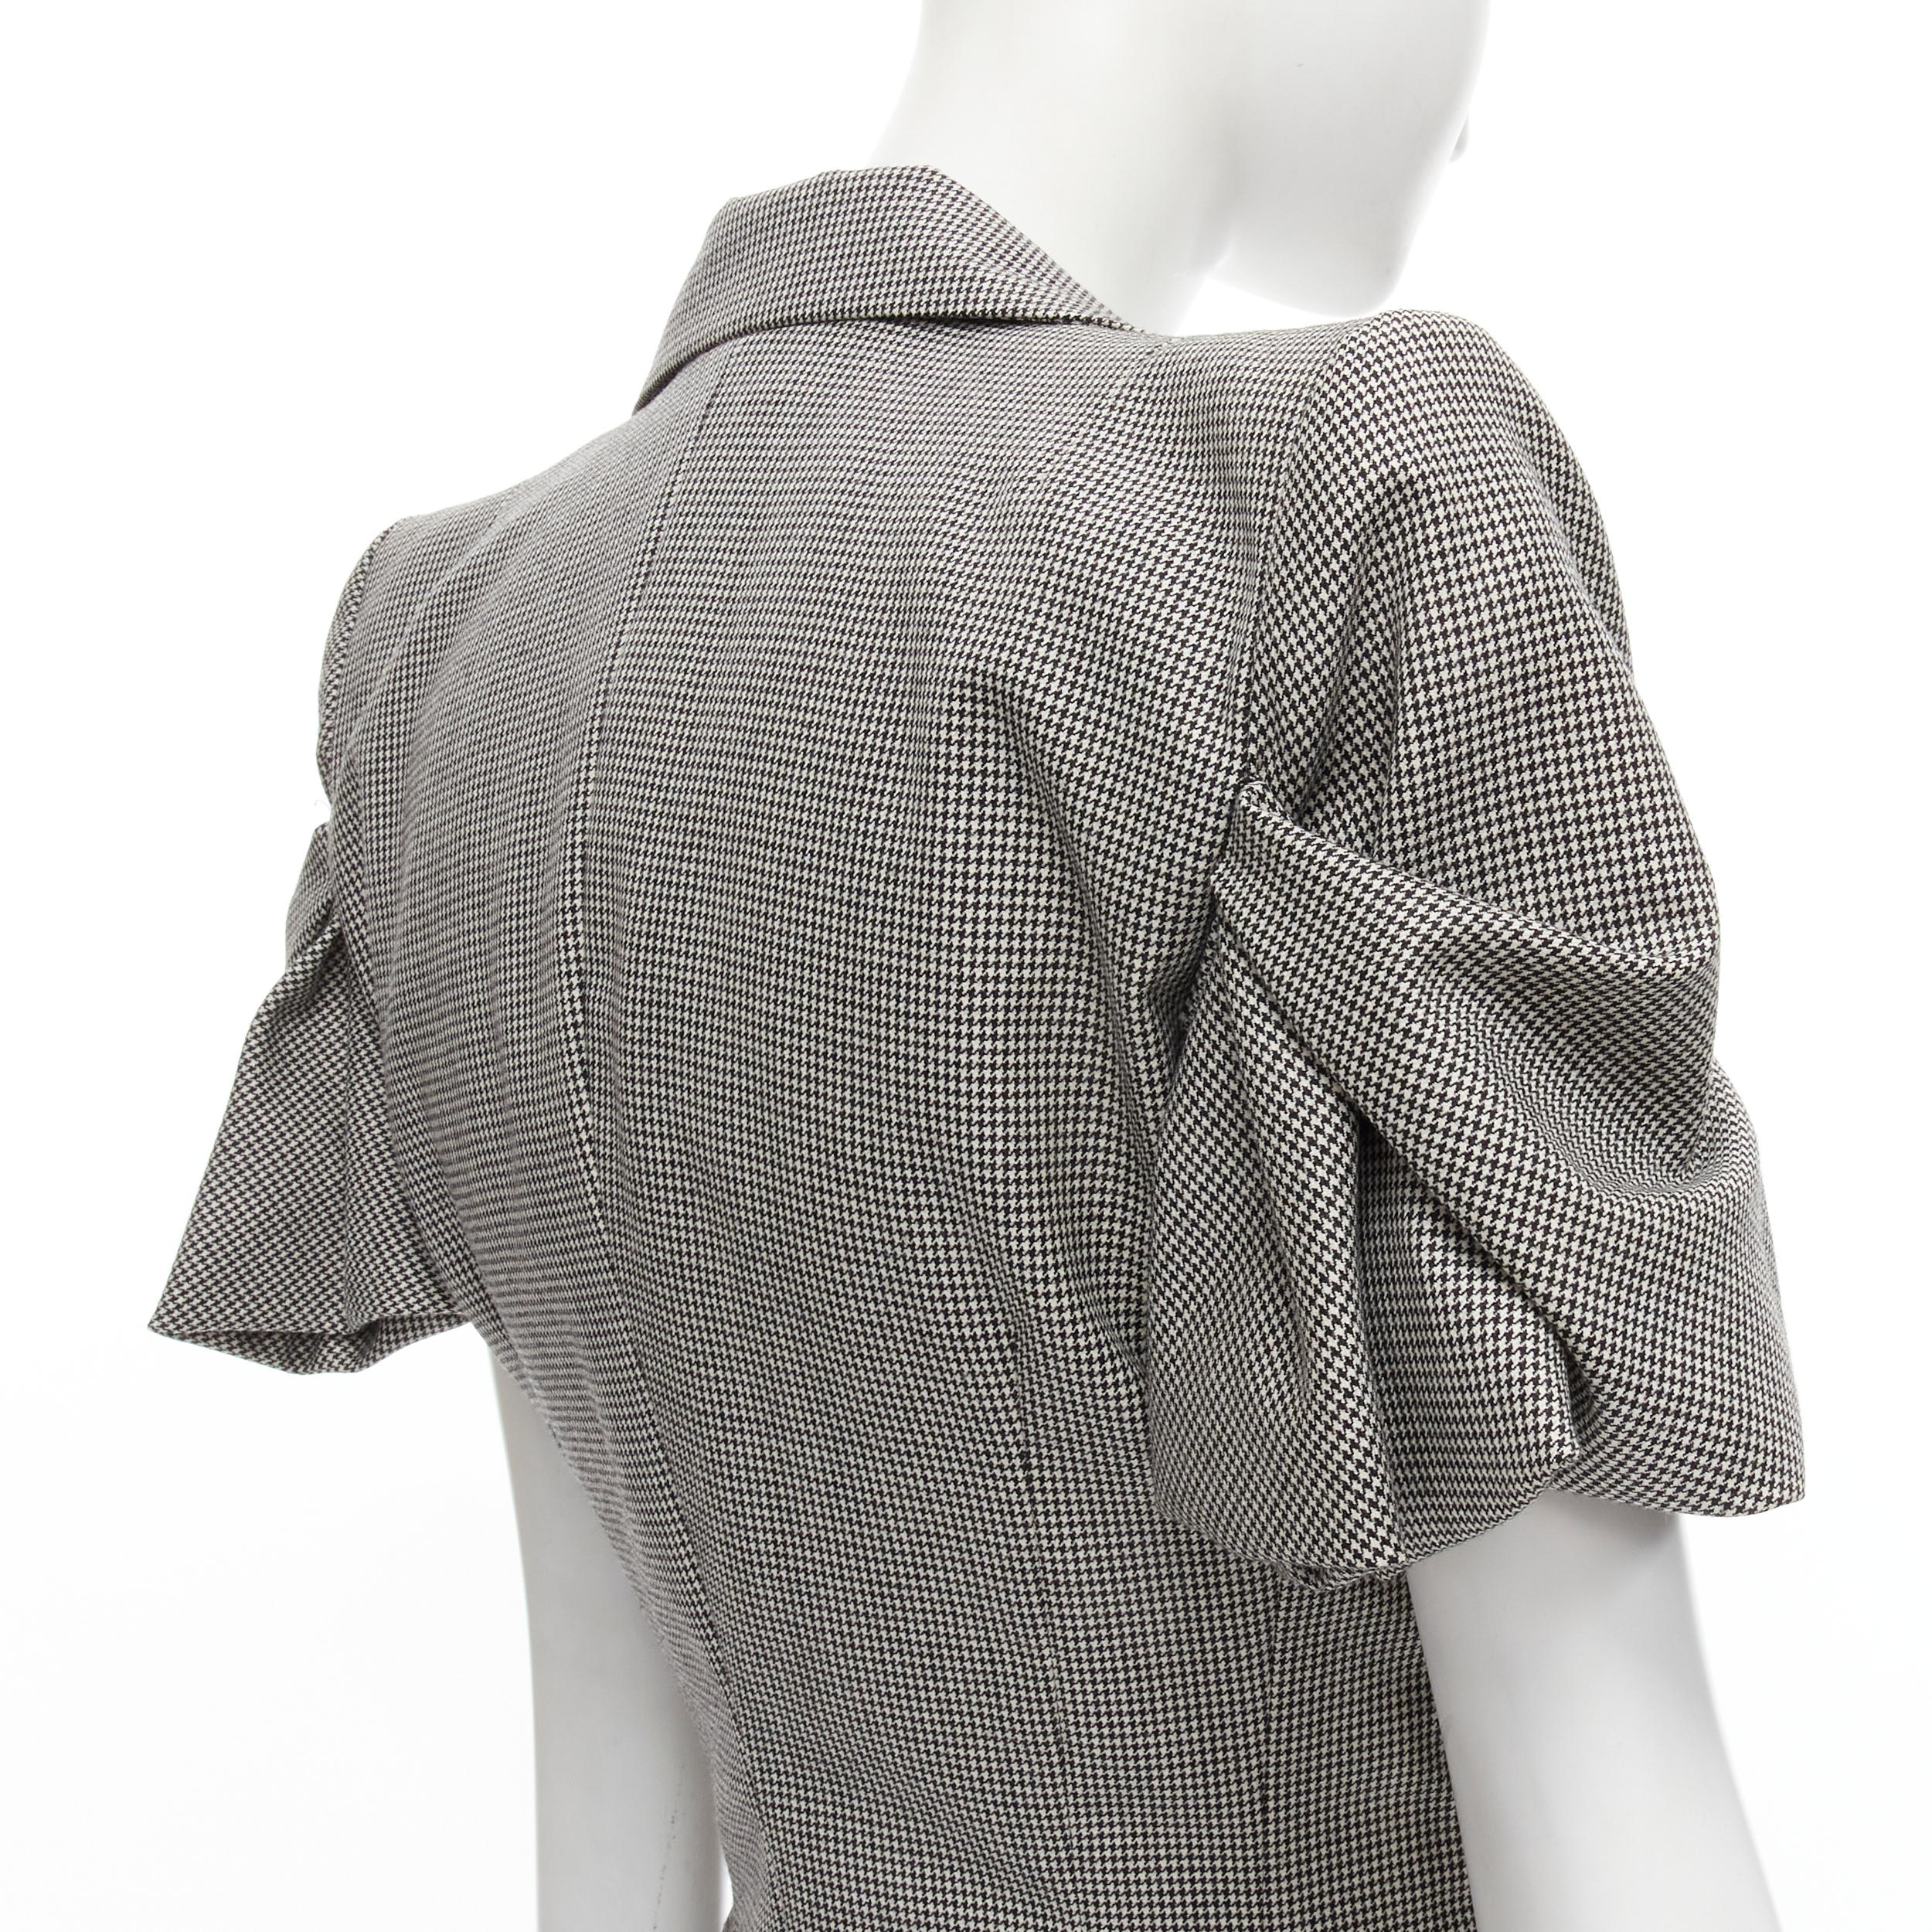 JOHN GALLIANO 1995 Vintage grey houndstooth padded hip jacket skirt Madonna IT40 
Reference: CRTI/A00599 
Brand: John Galliano 
Designer: John Galliano 
Collection: Spring Summer 1995 Runway As seen on: Madonna 
Material: Wool 
Color: Grey 
Pattern: